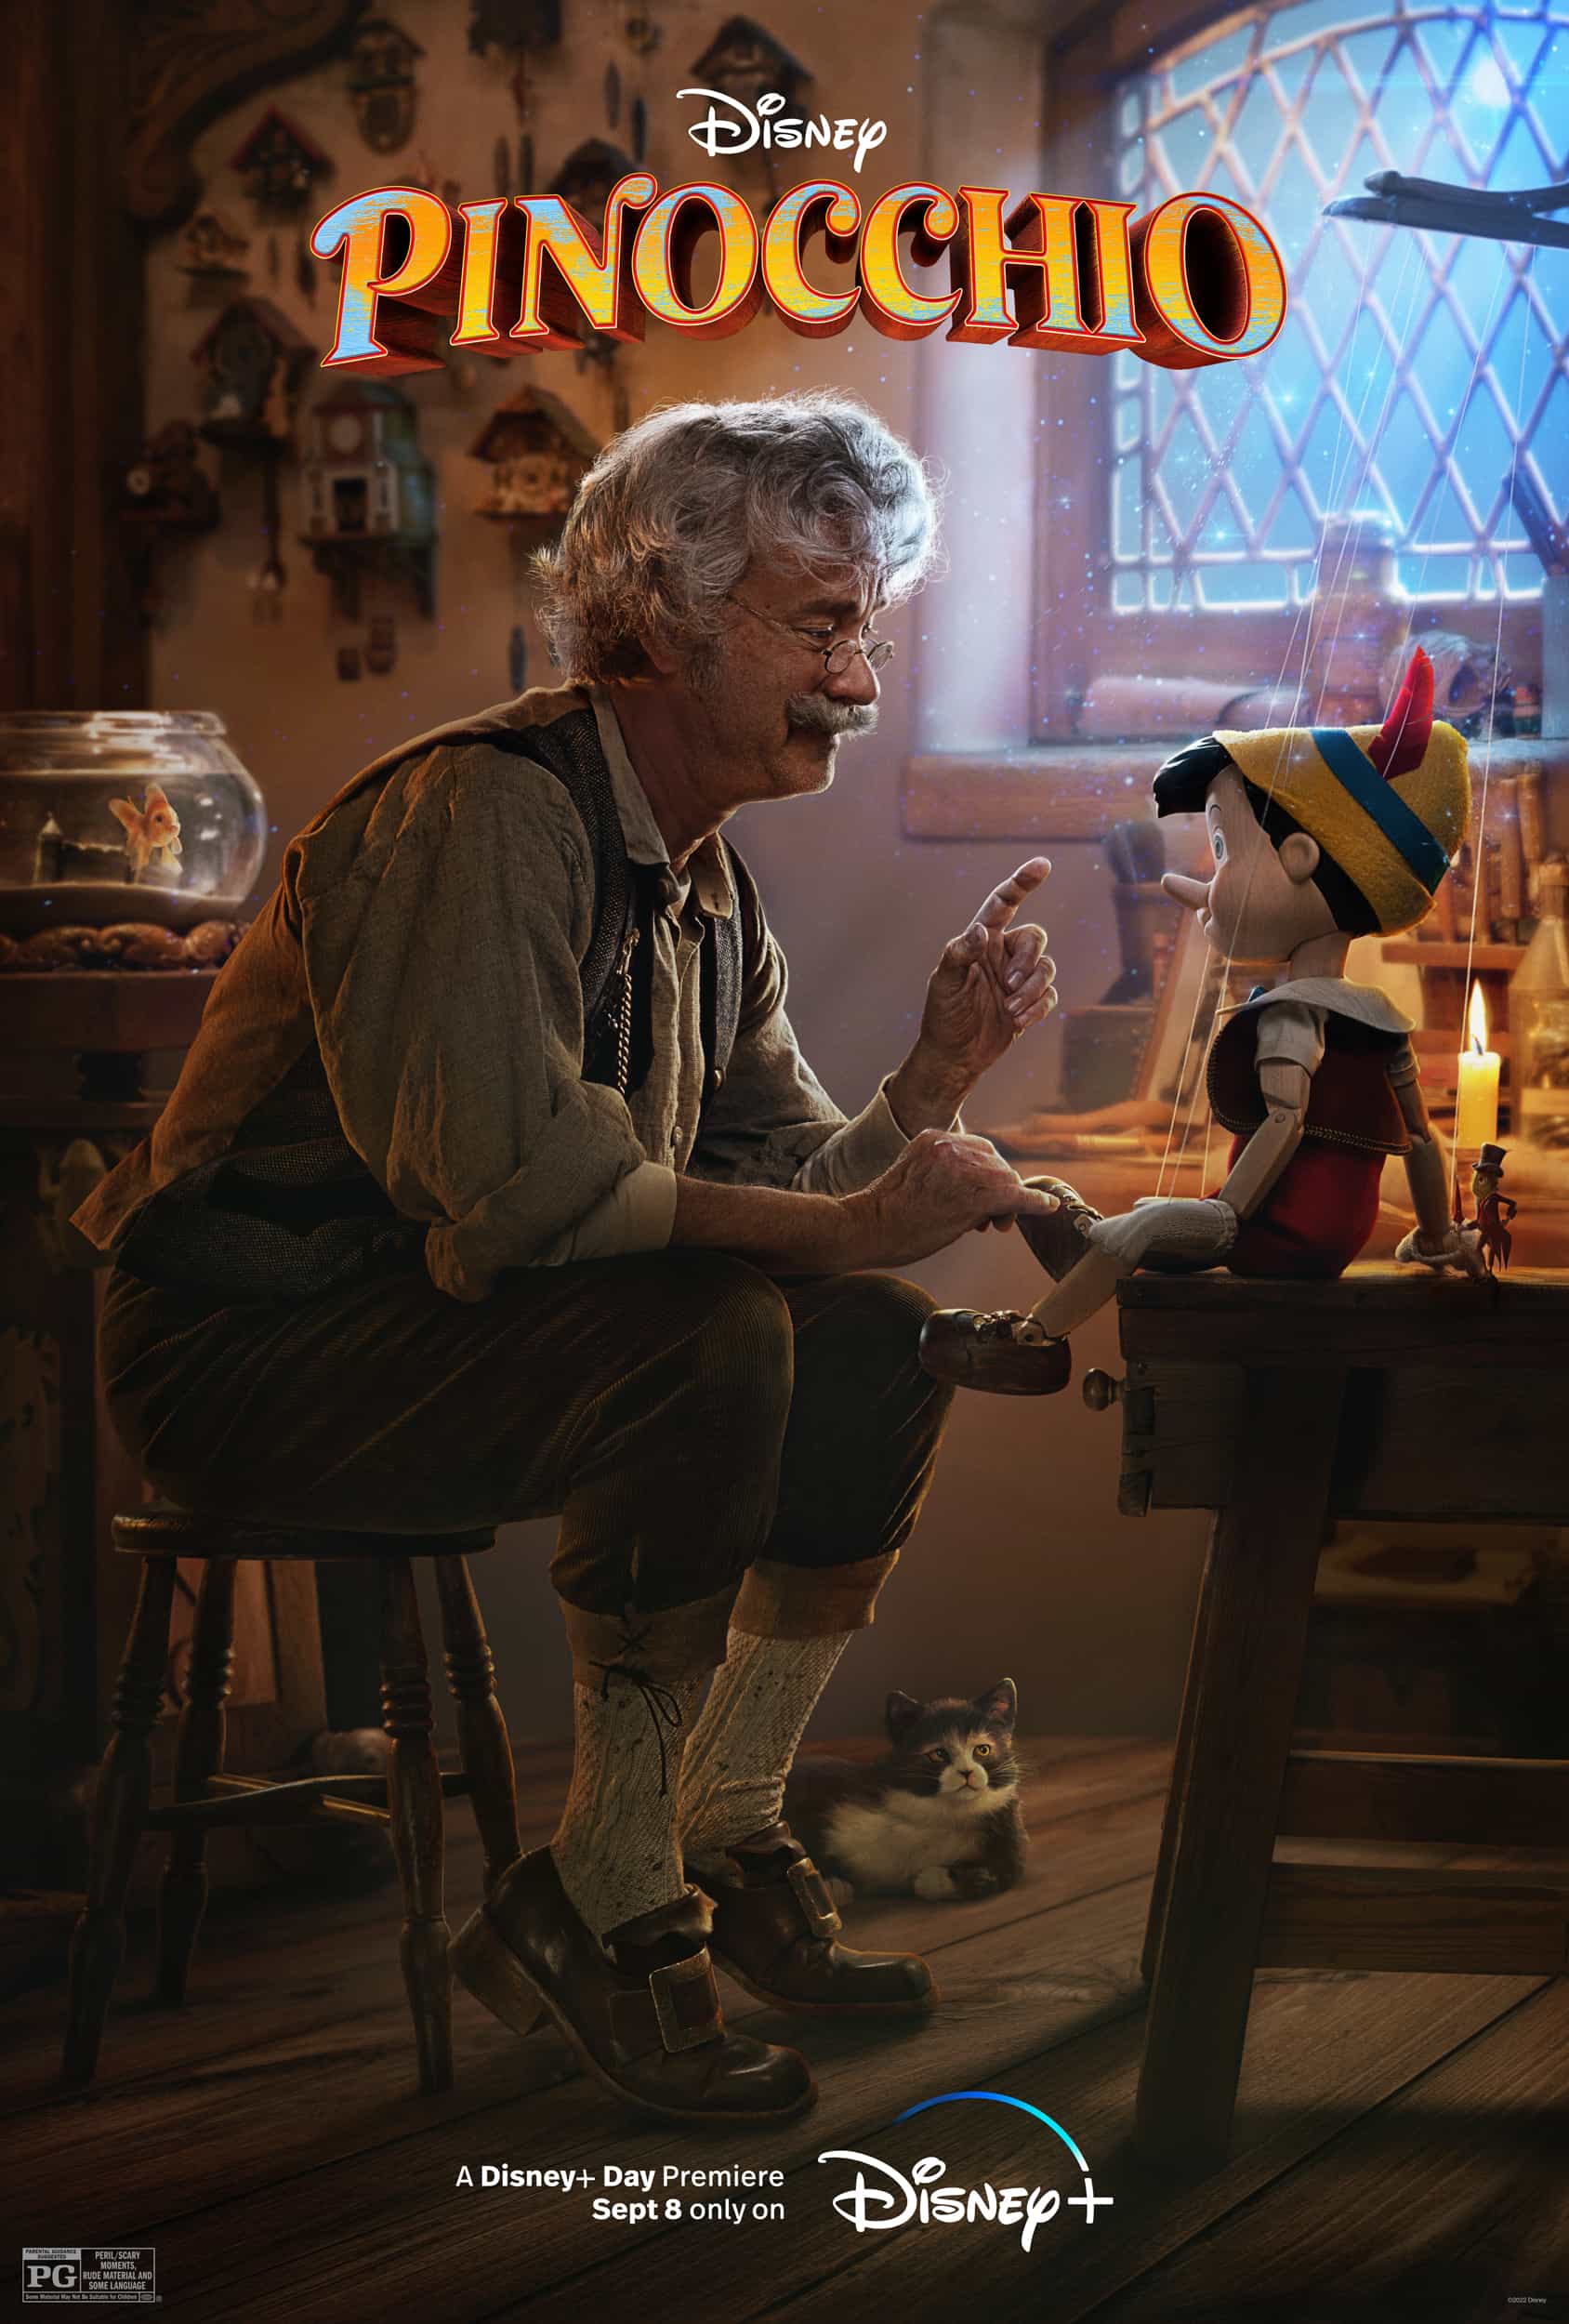 New trailer and teaser poster released for Pinocchio starring Tom Hanks - movie UK release date 8th September 2022 #pinocchio